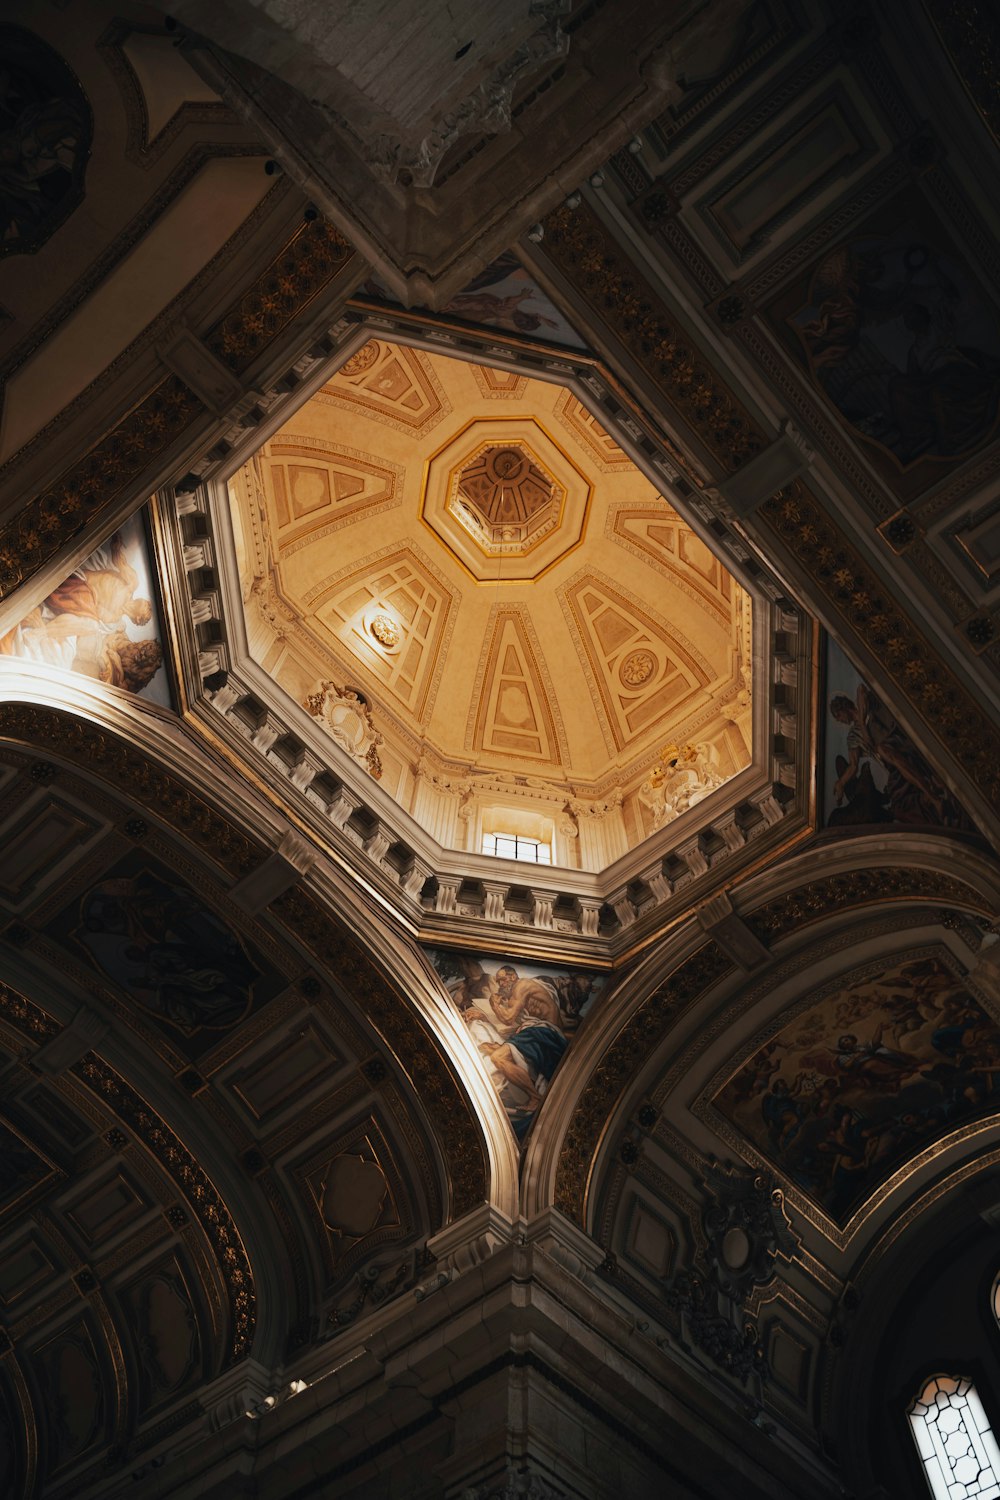 the ceiling of a church with a painted dome